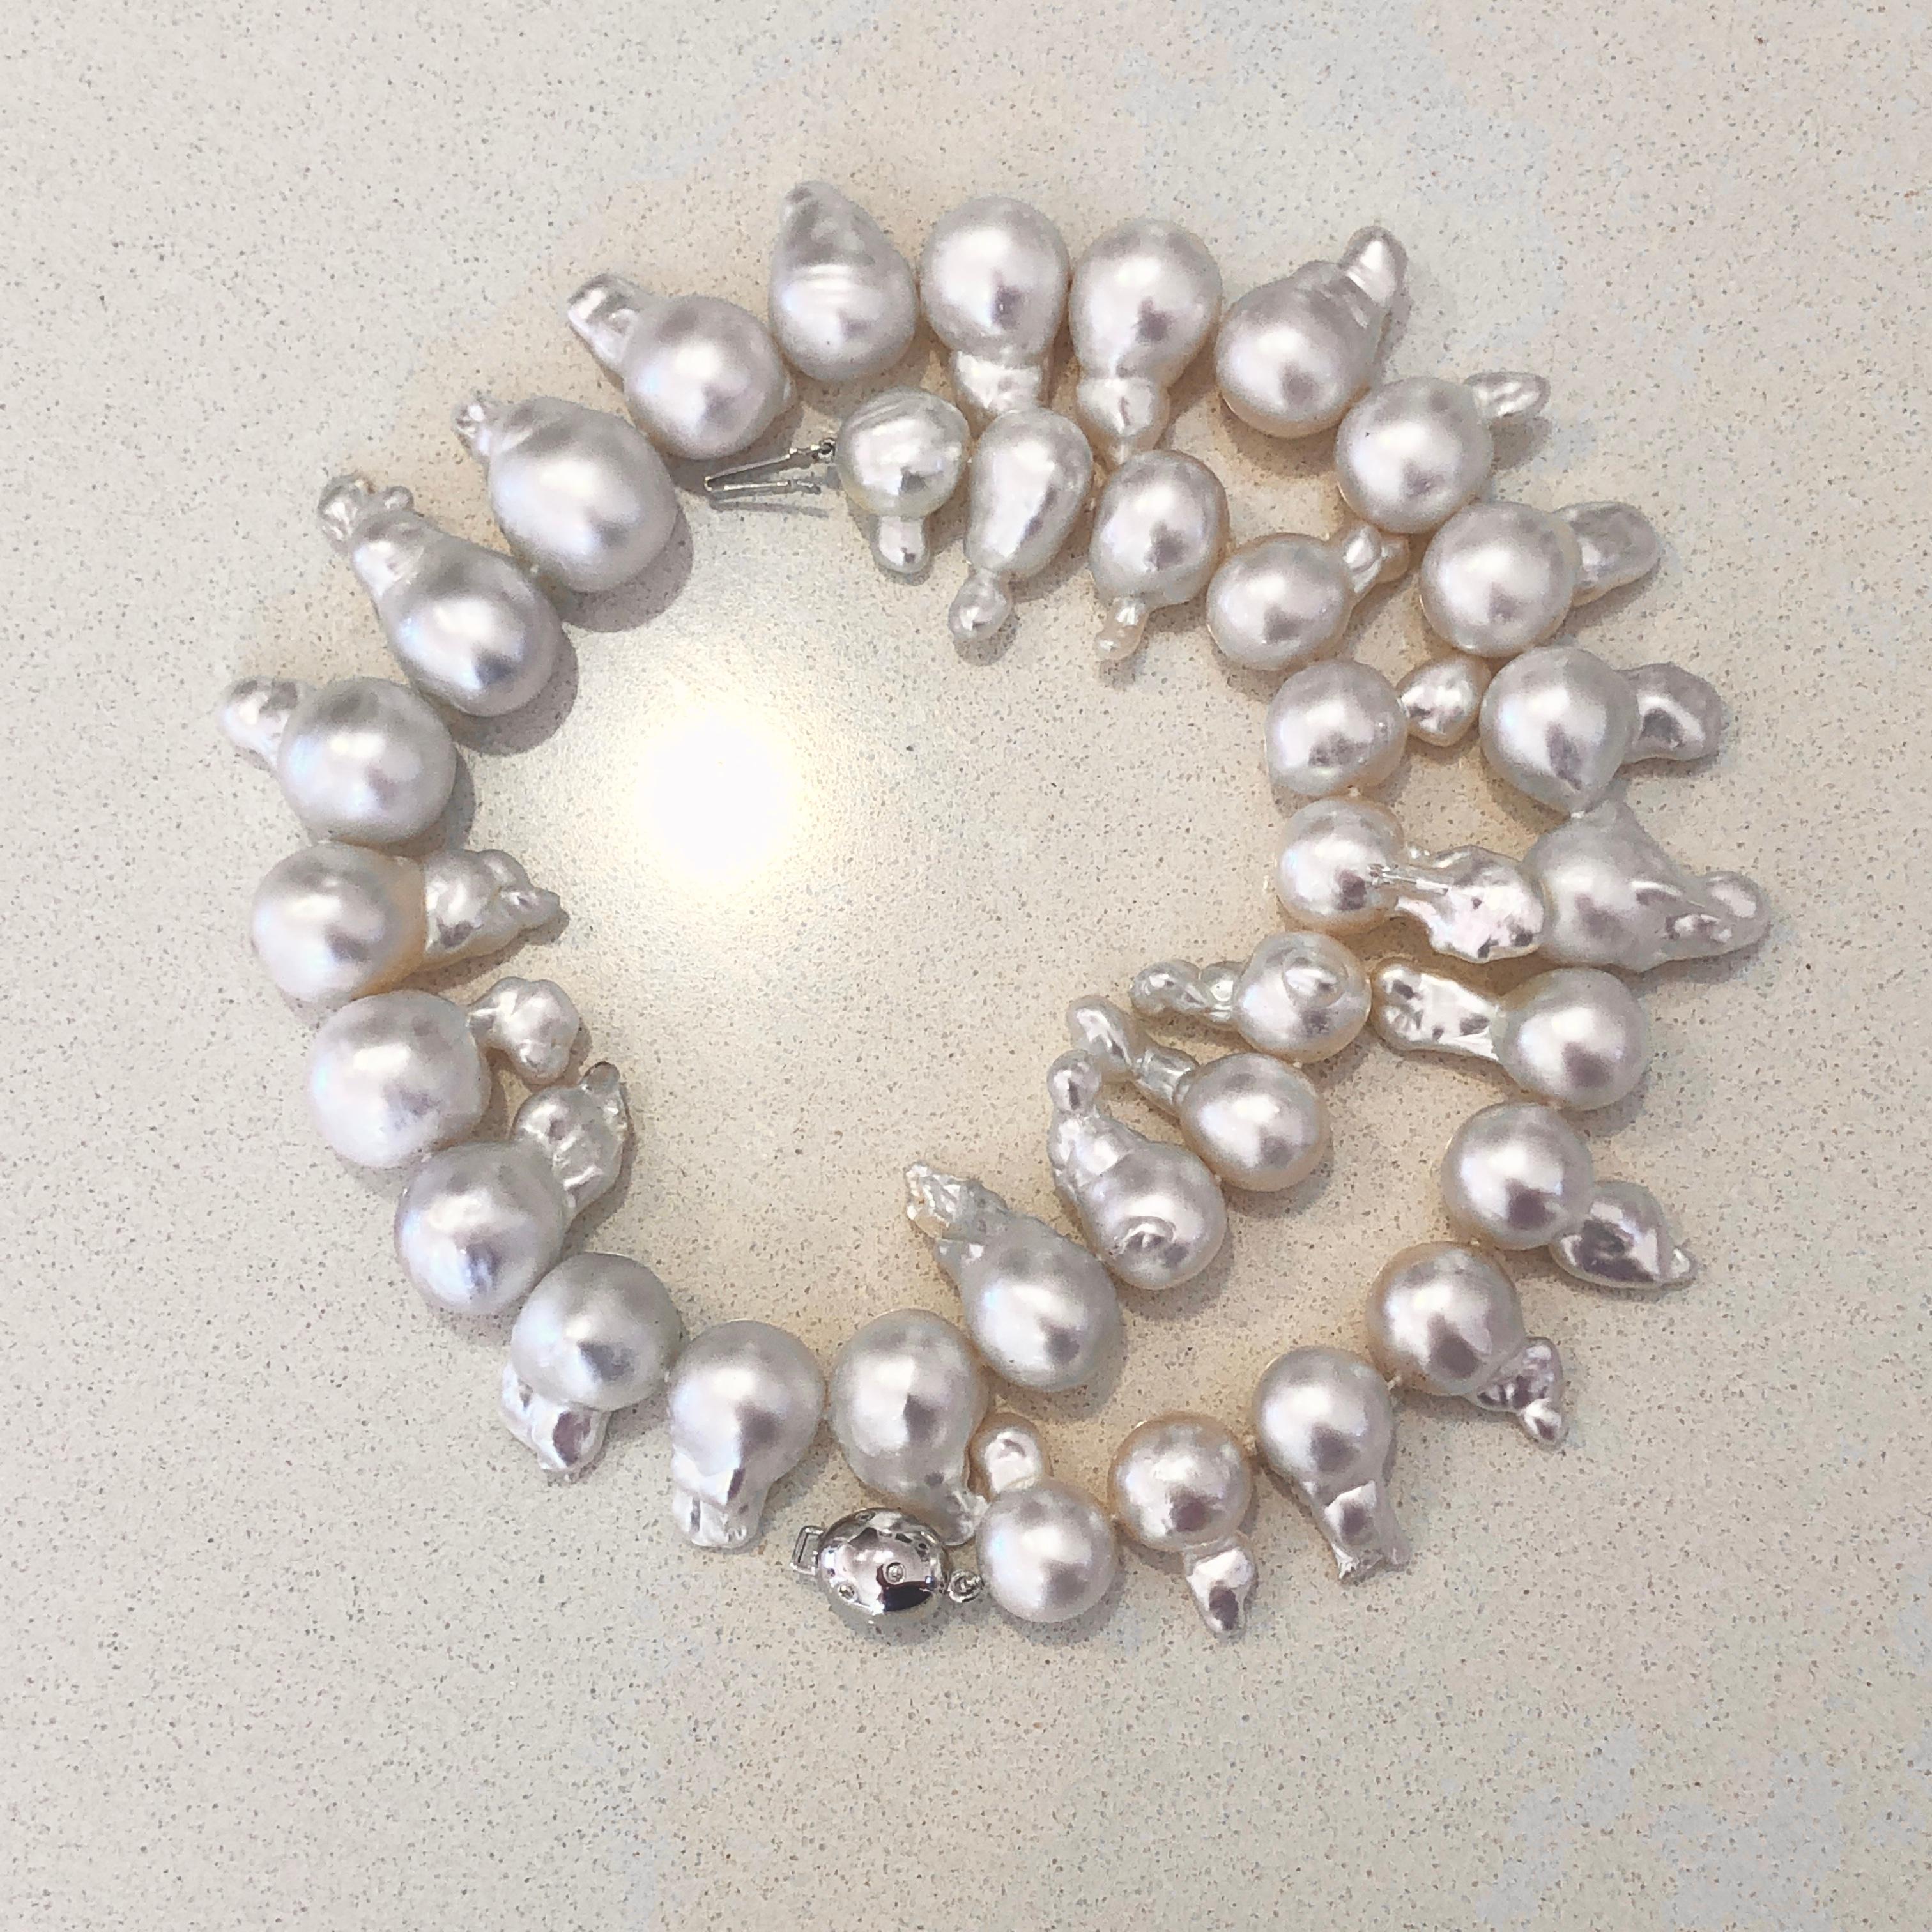 What makes some jewellery so magnificent is their unique beauty - just like this 46 CM Baroque South Sea Pearl Diamond 18 Carat White Gold Necklace.

It is a true wow piece and features 34 striking Baroque pearls full of personality and lustre.